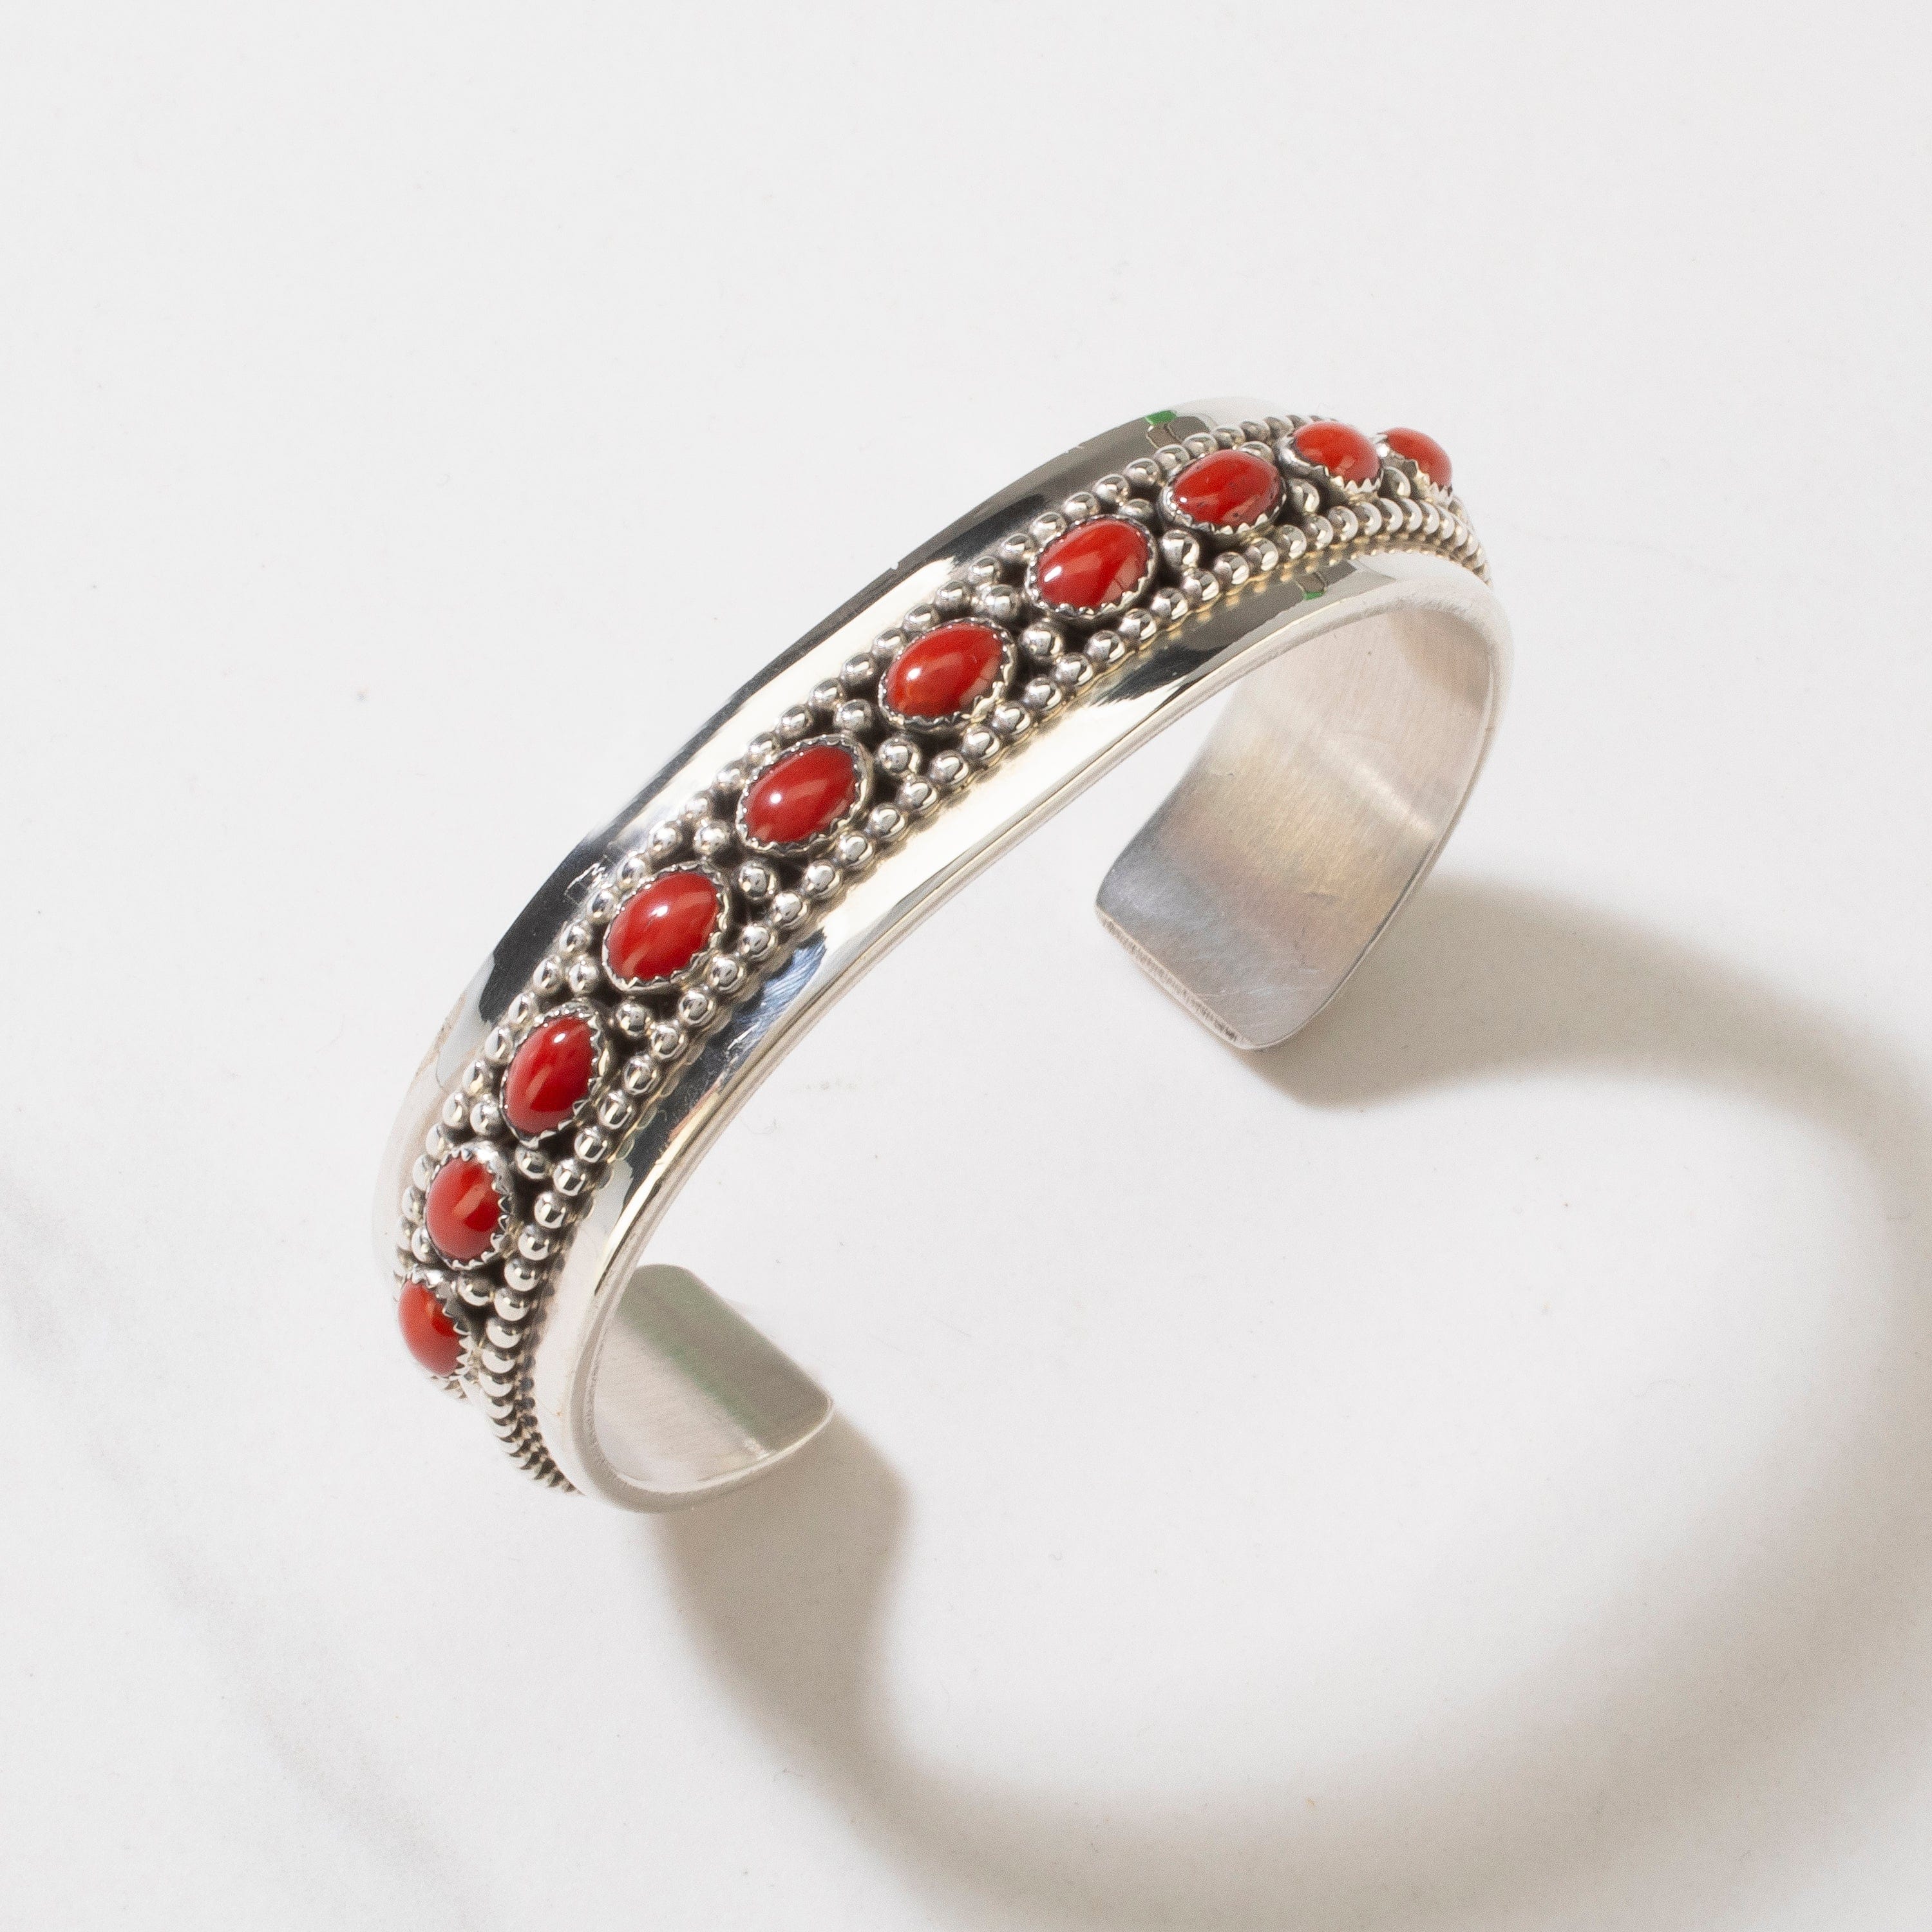 Kalifano Native American Jewelry Darrin Livingston Navajo Red Coral USA Native American Made 925 Sterling Silver Cuff NAB2400.017